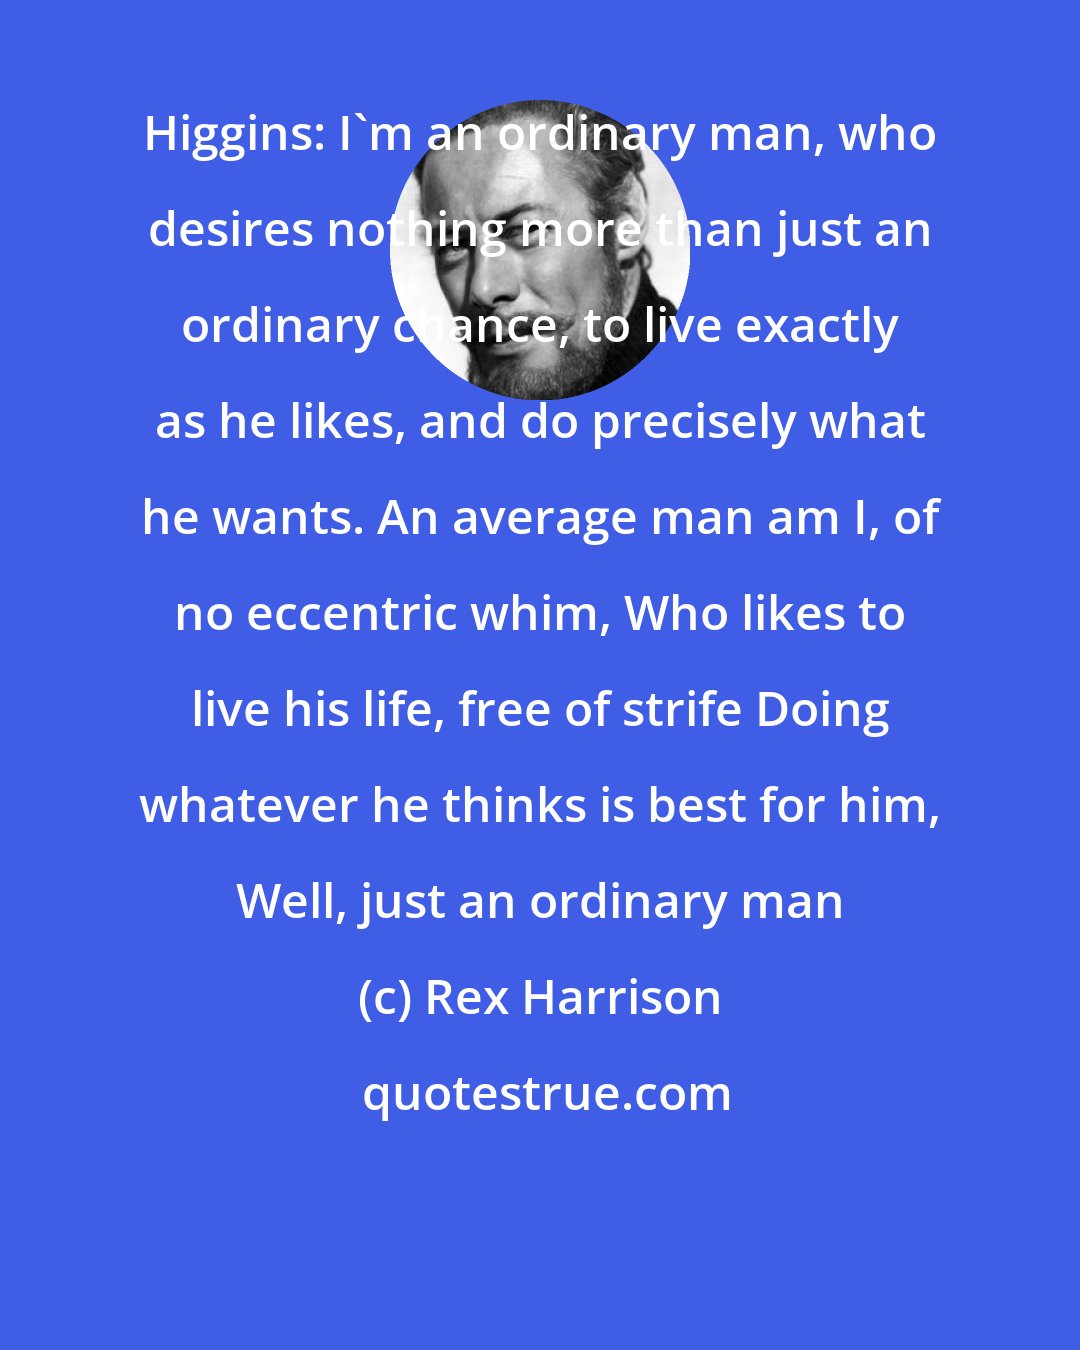 Rex Harrison: Higgins: I'm an ordinary man, who desires nothing more than just an ordinary chance, to live exactly as he likes, and do precisely what he wants. An average man am I, of no eccentric whim, Who likes to live his life, free of strife Doing whatever he thinks is best for him, Well, just an ordinary man